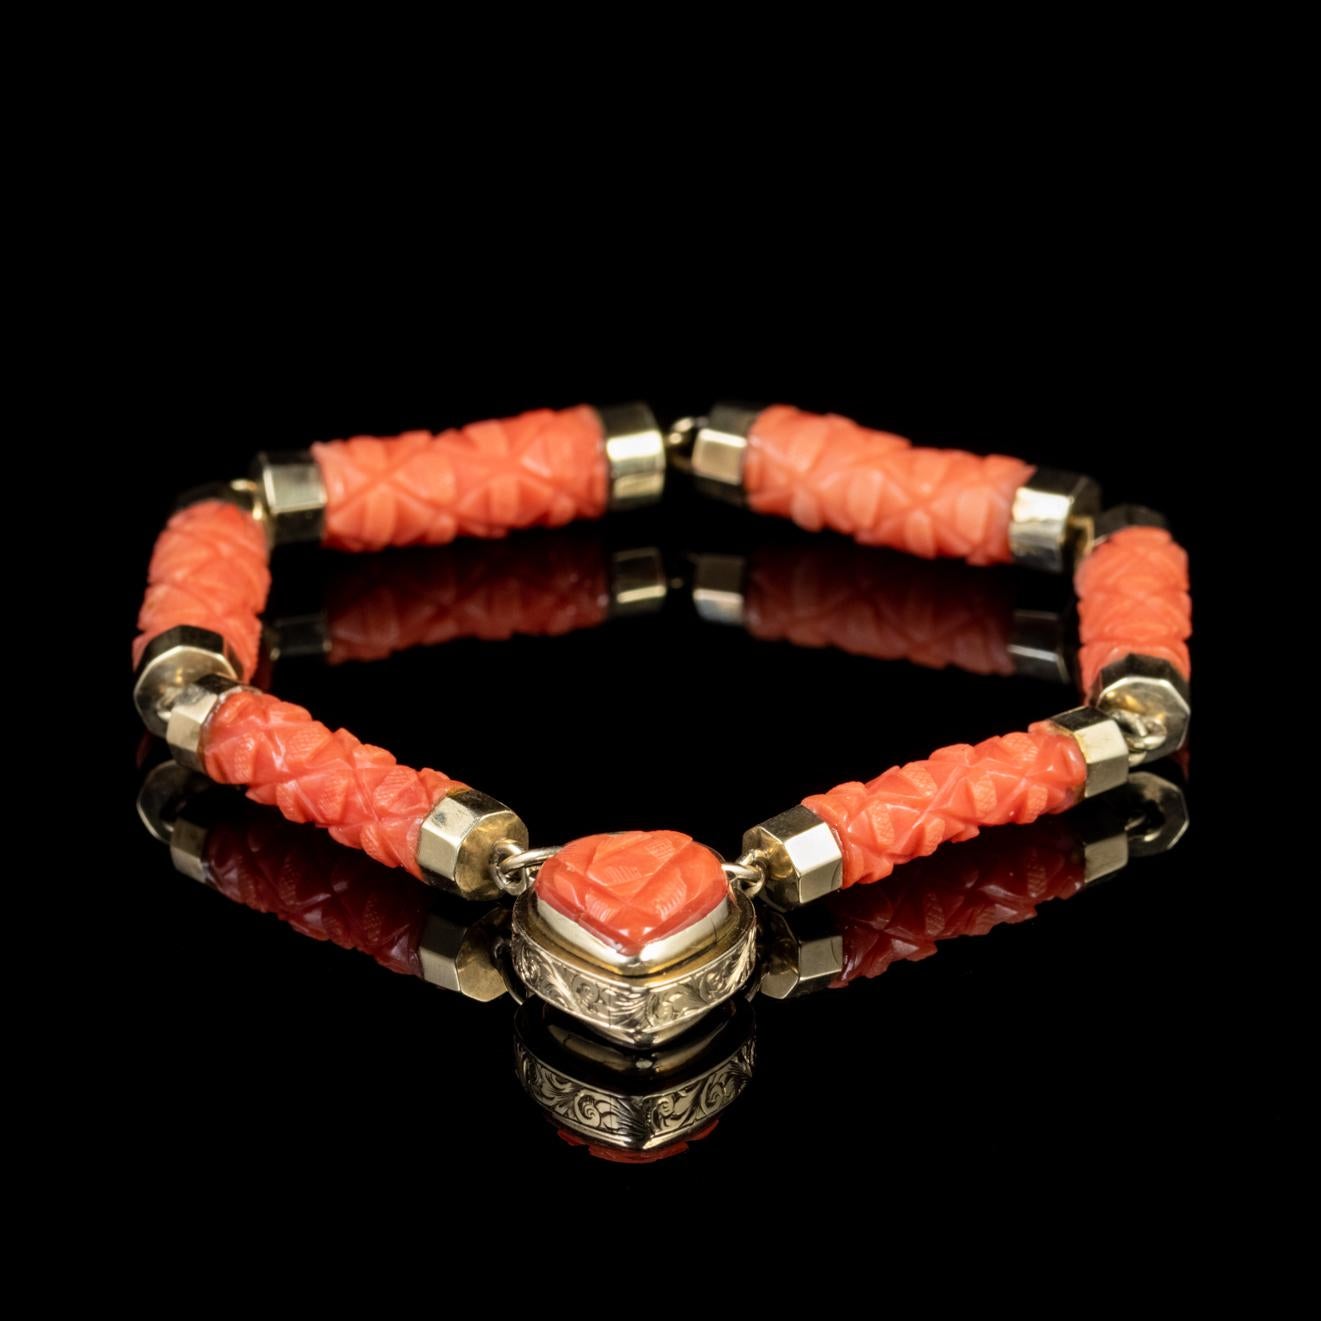 A beautiful antique Georgian bracelet made up of fancy engraved Coral links with 18ct Yellow Gold tips.  

Similar to Pearls, Coral is made naturally in the depths of the ocean and boasts fiery shades of petal pink and burnt orange which were